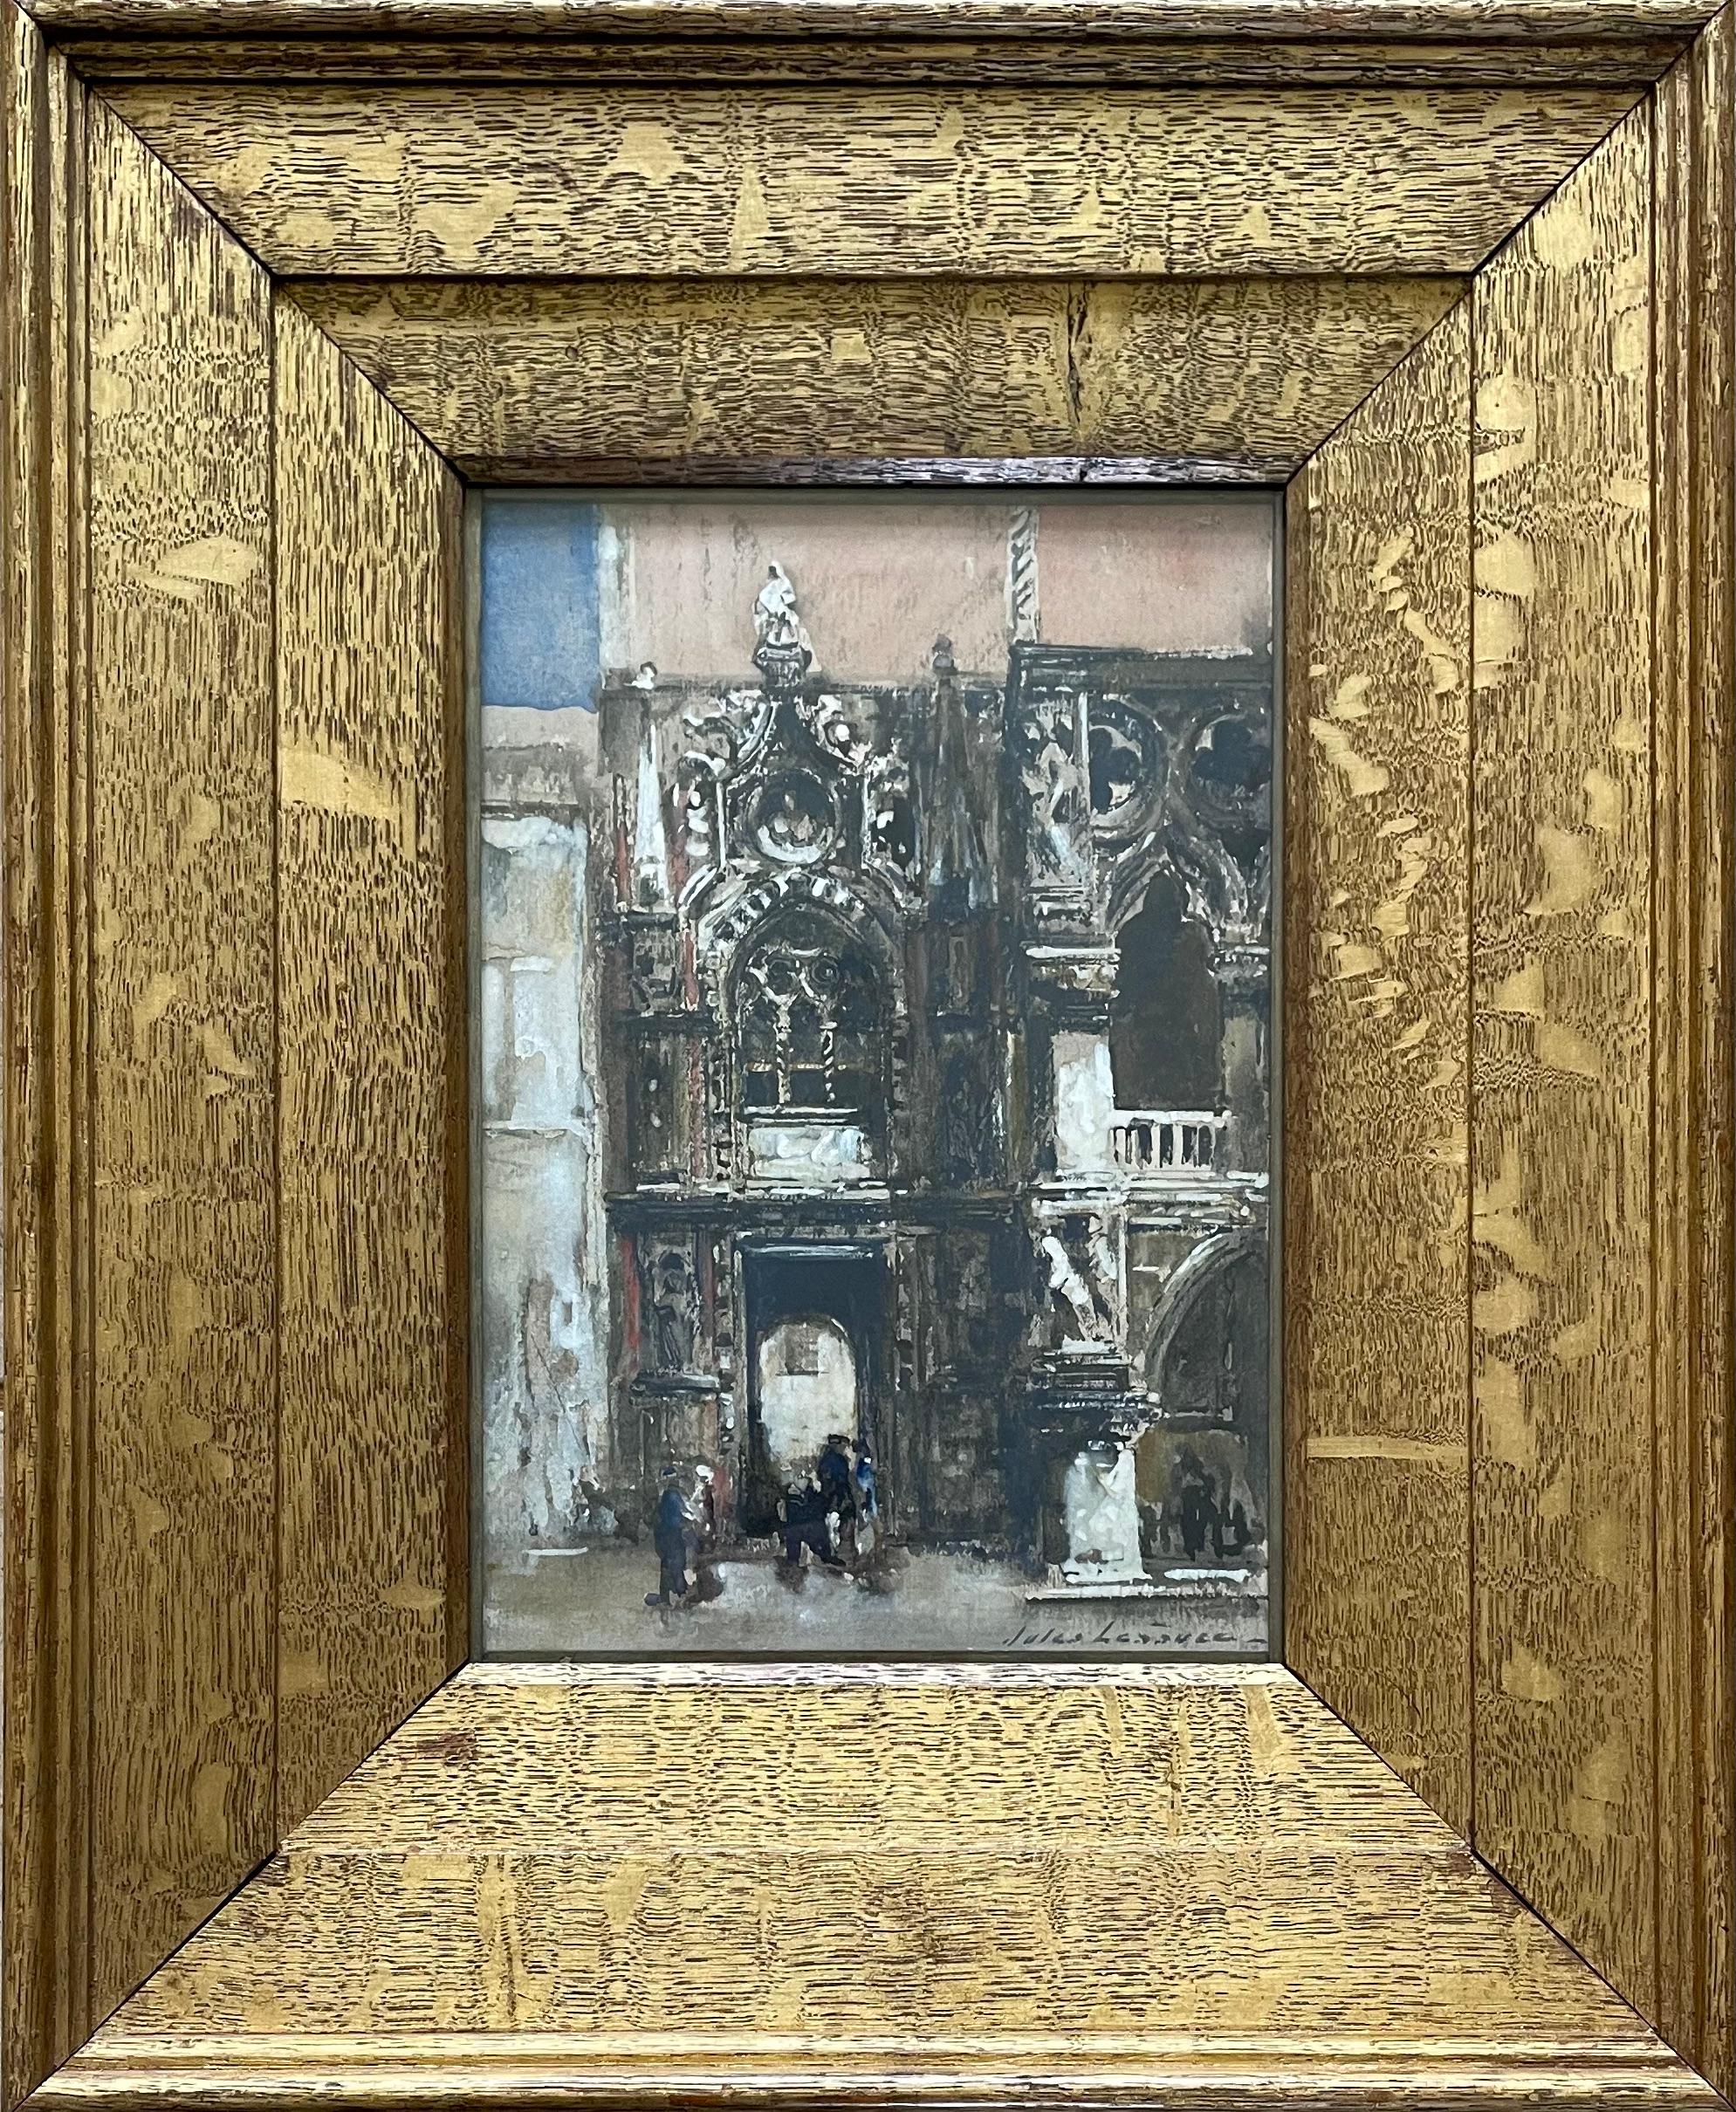 JULES LESSORE
(1849-1892)

The Ducal Palace, Venice

Signed l.r.: Jules Lessore
Watercolour
Framed

24.5 by 17 cm., 9 ¾ by 6 ¾ in.
(frame size 44.5 by 36.5 cm., 17 ½ by 14 ½ in.)

Provenance:
With Duncan Miller Fine Art, London.

Jules Lessore was